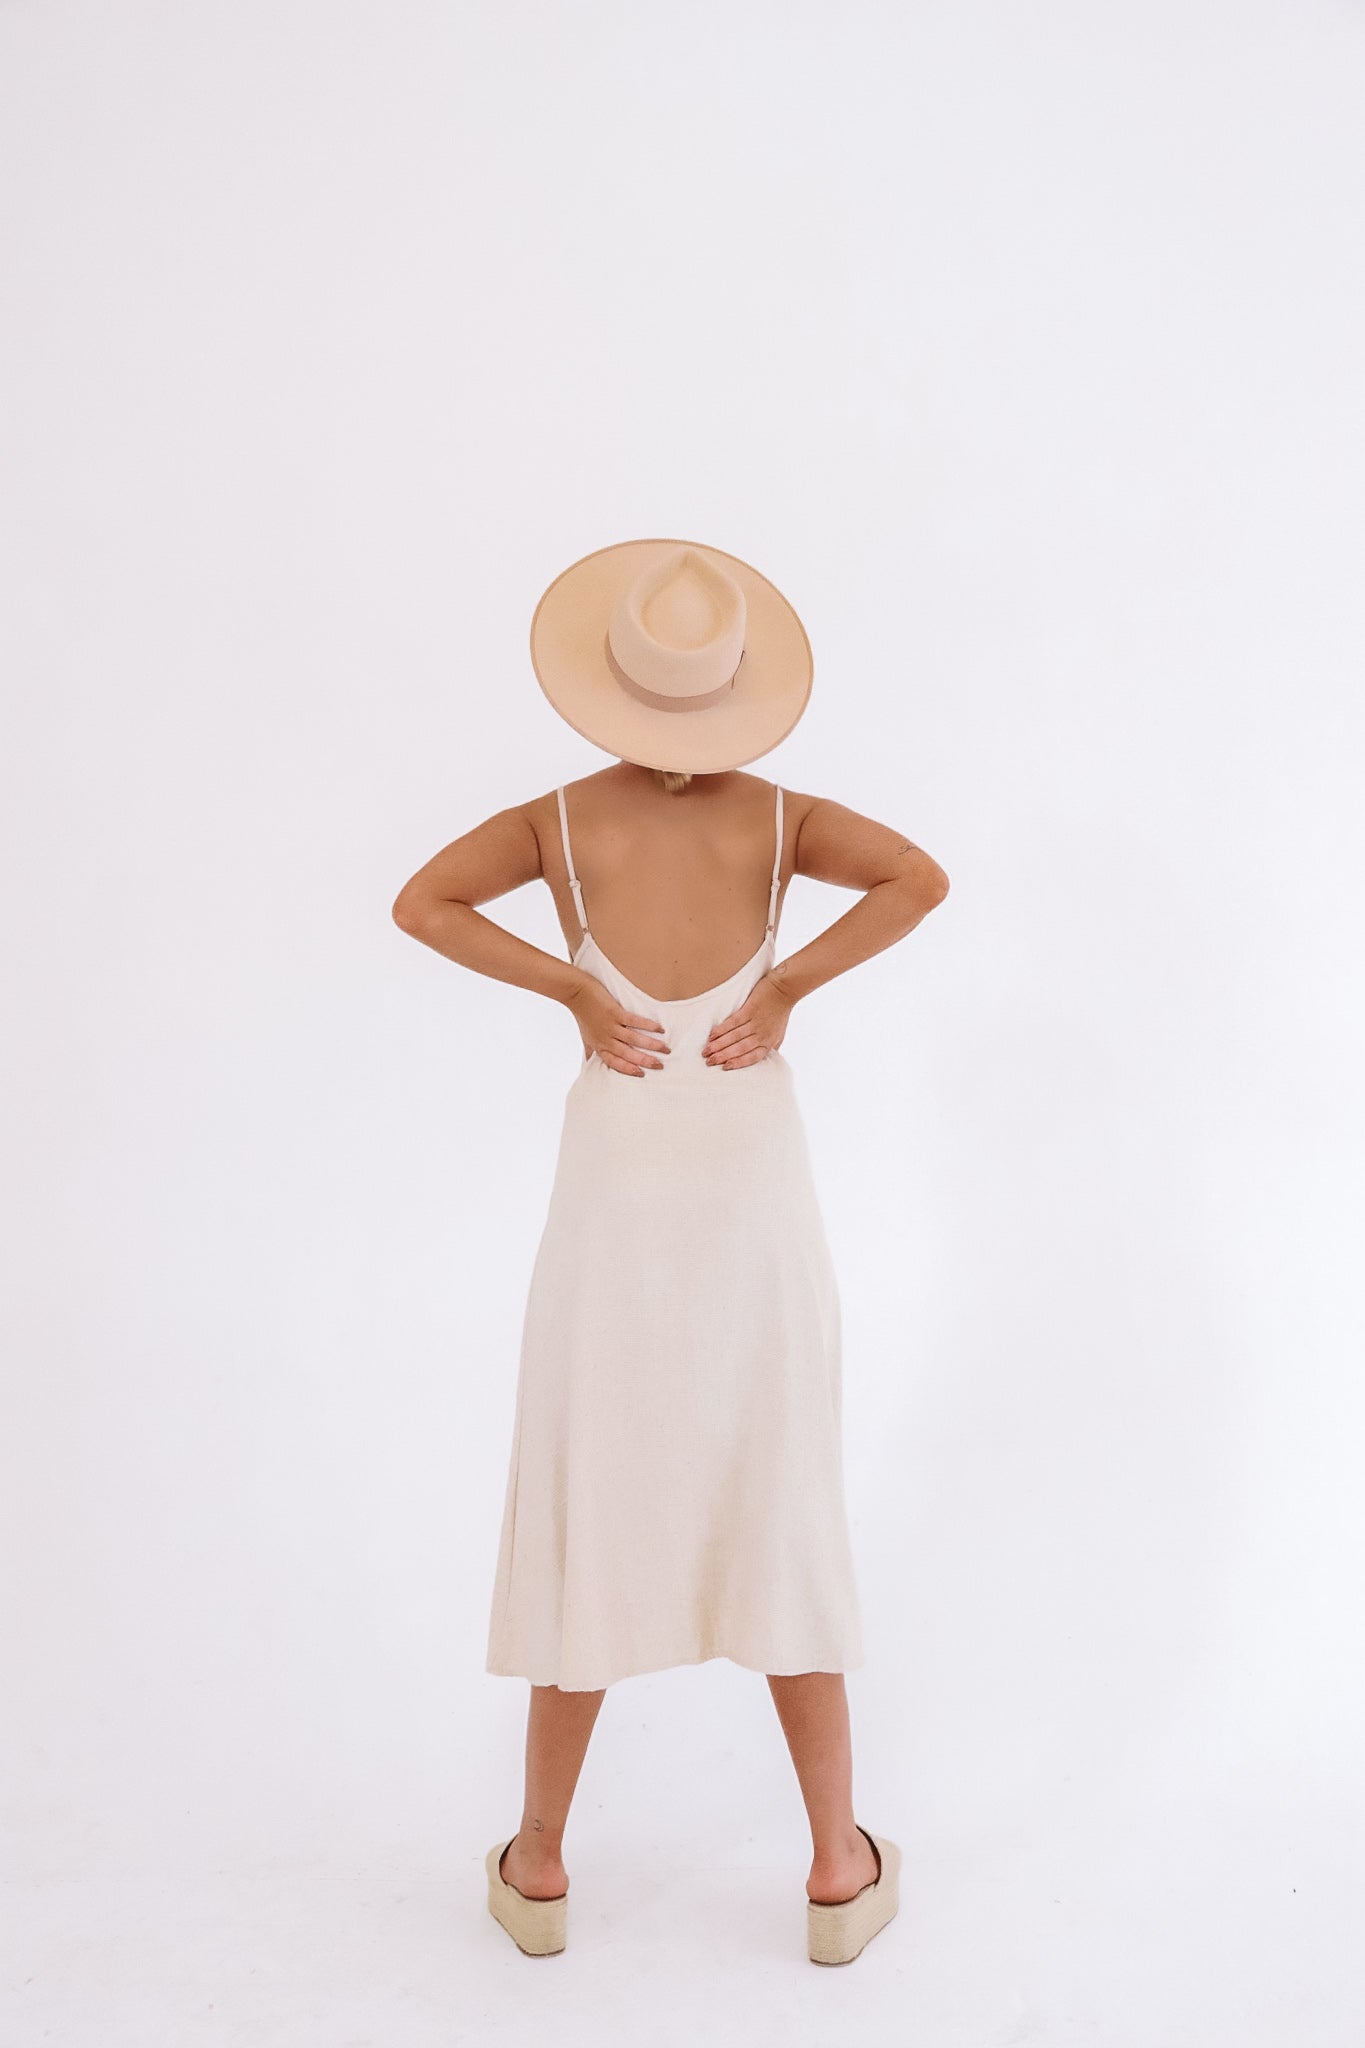 The Lola Midi Dress in Natural Textured Cotton